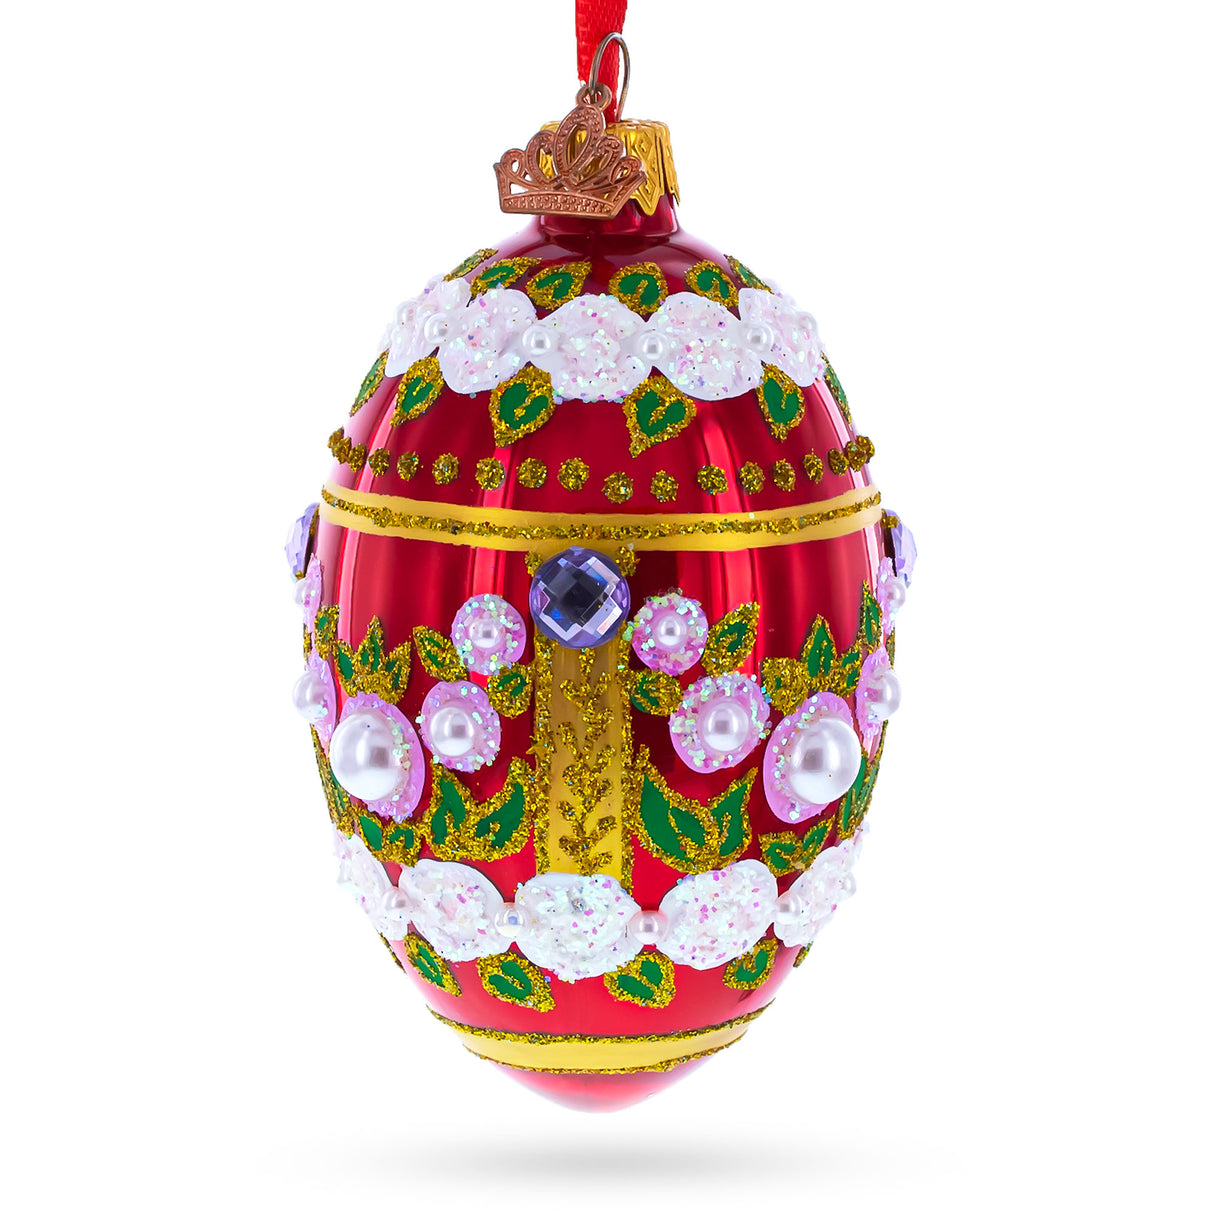 Pearl Flowers on Glossy Red Glass Egg Ornament 4 Inches in Red color, Oval shape